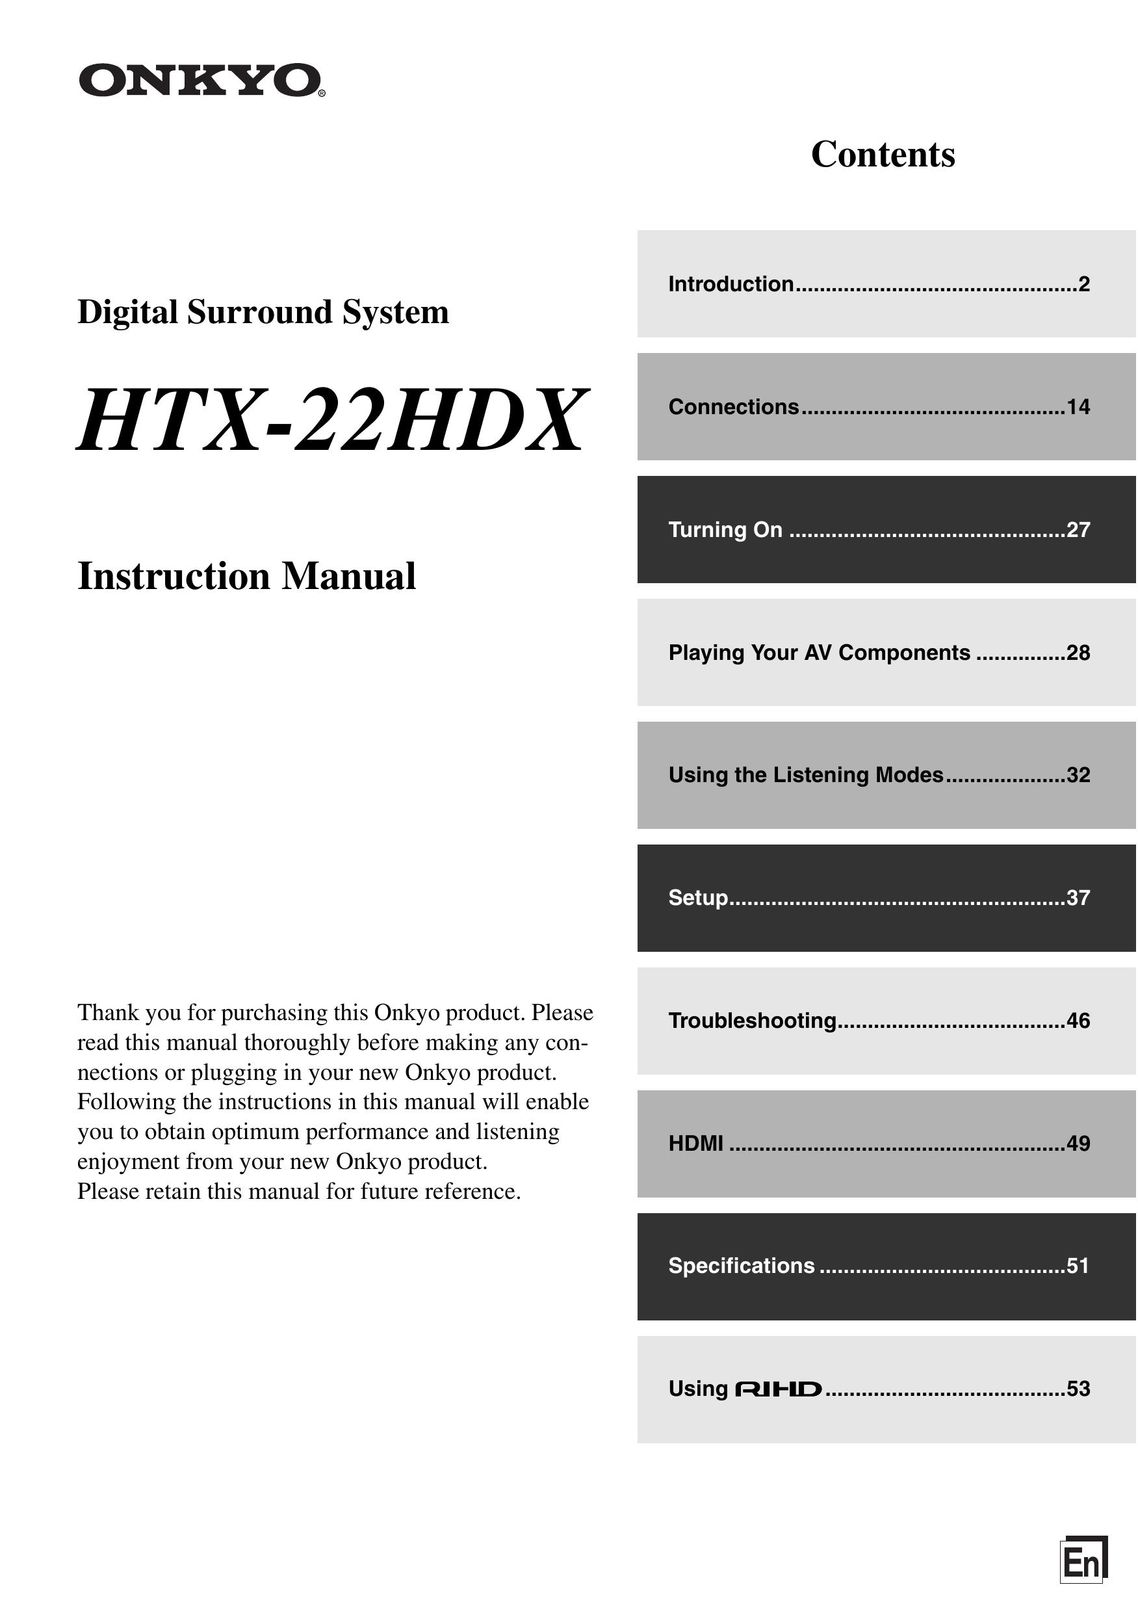 Onkyo HTX-22HDX Stereo System User Manual